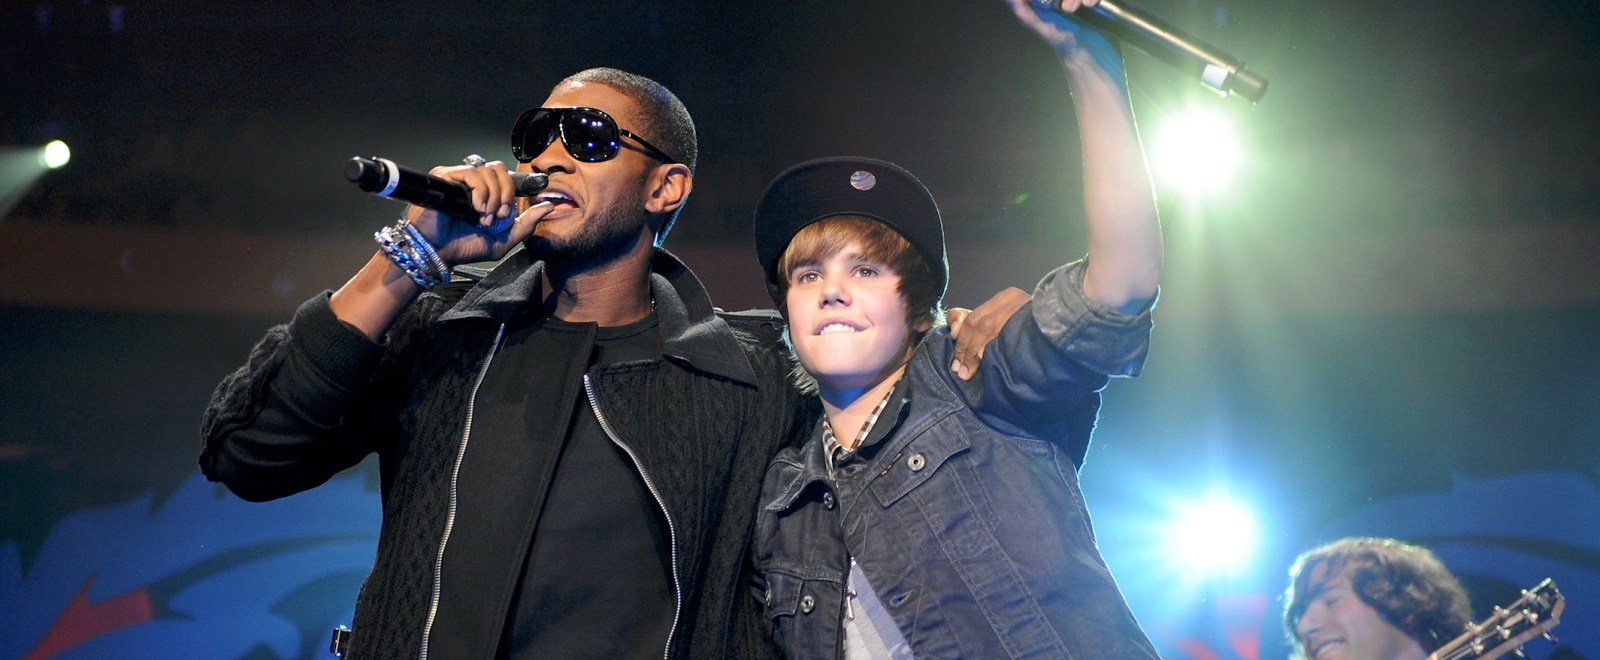 Will Justin Bieber Perform With Usher At The Super Bowl Halftime Show?